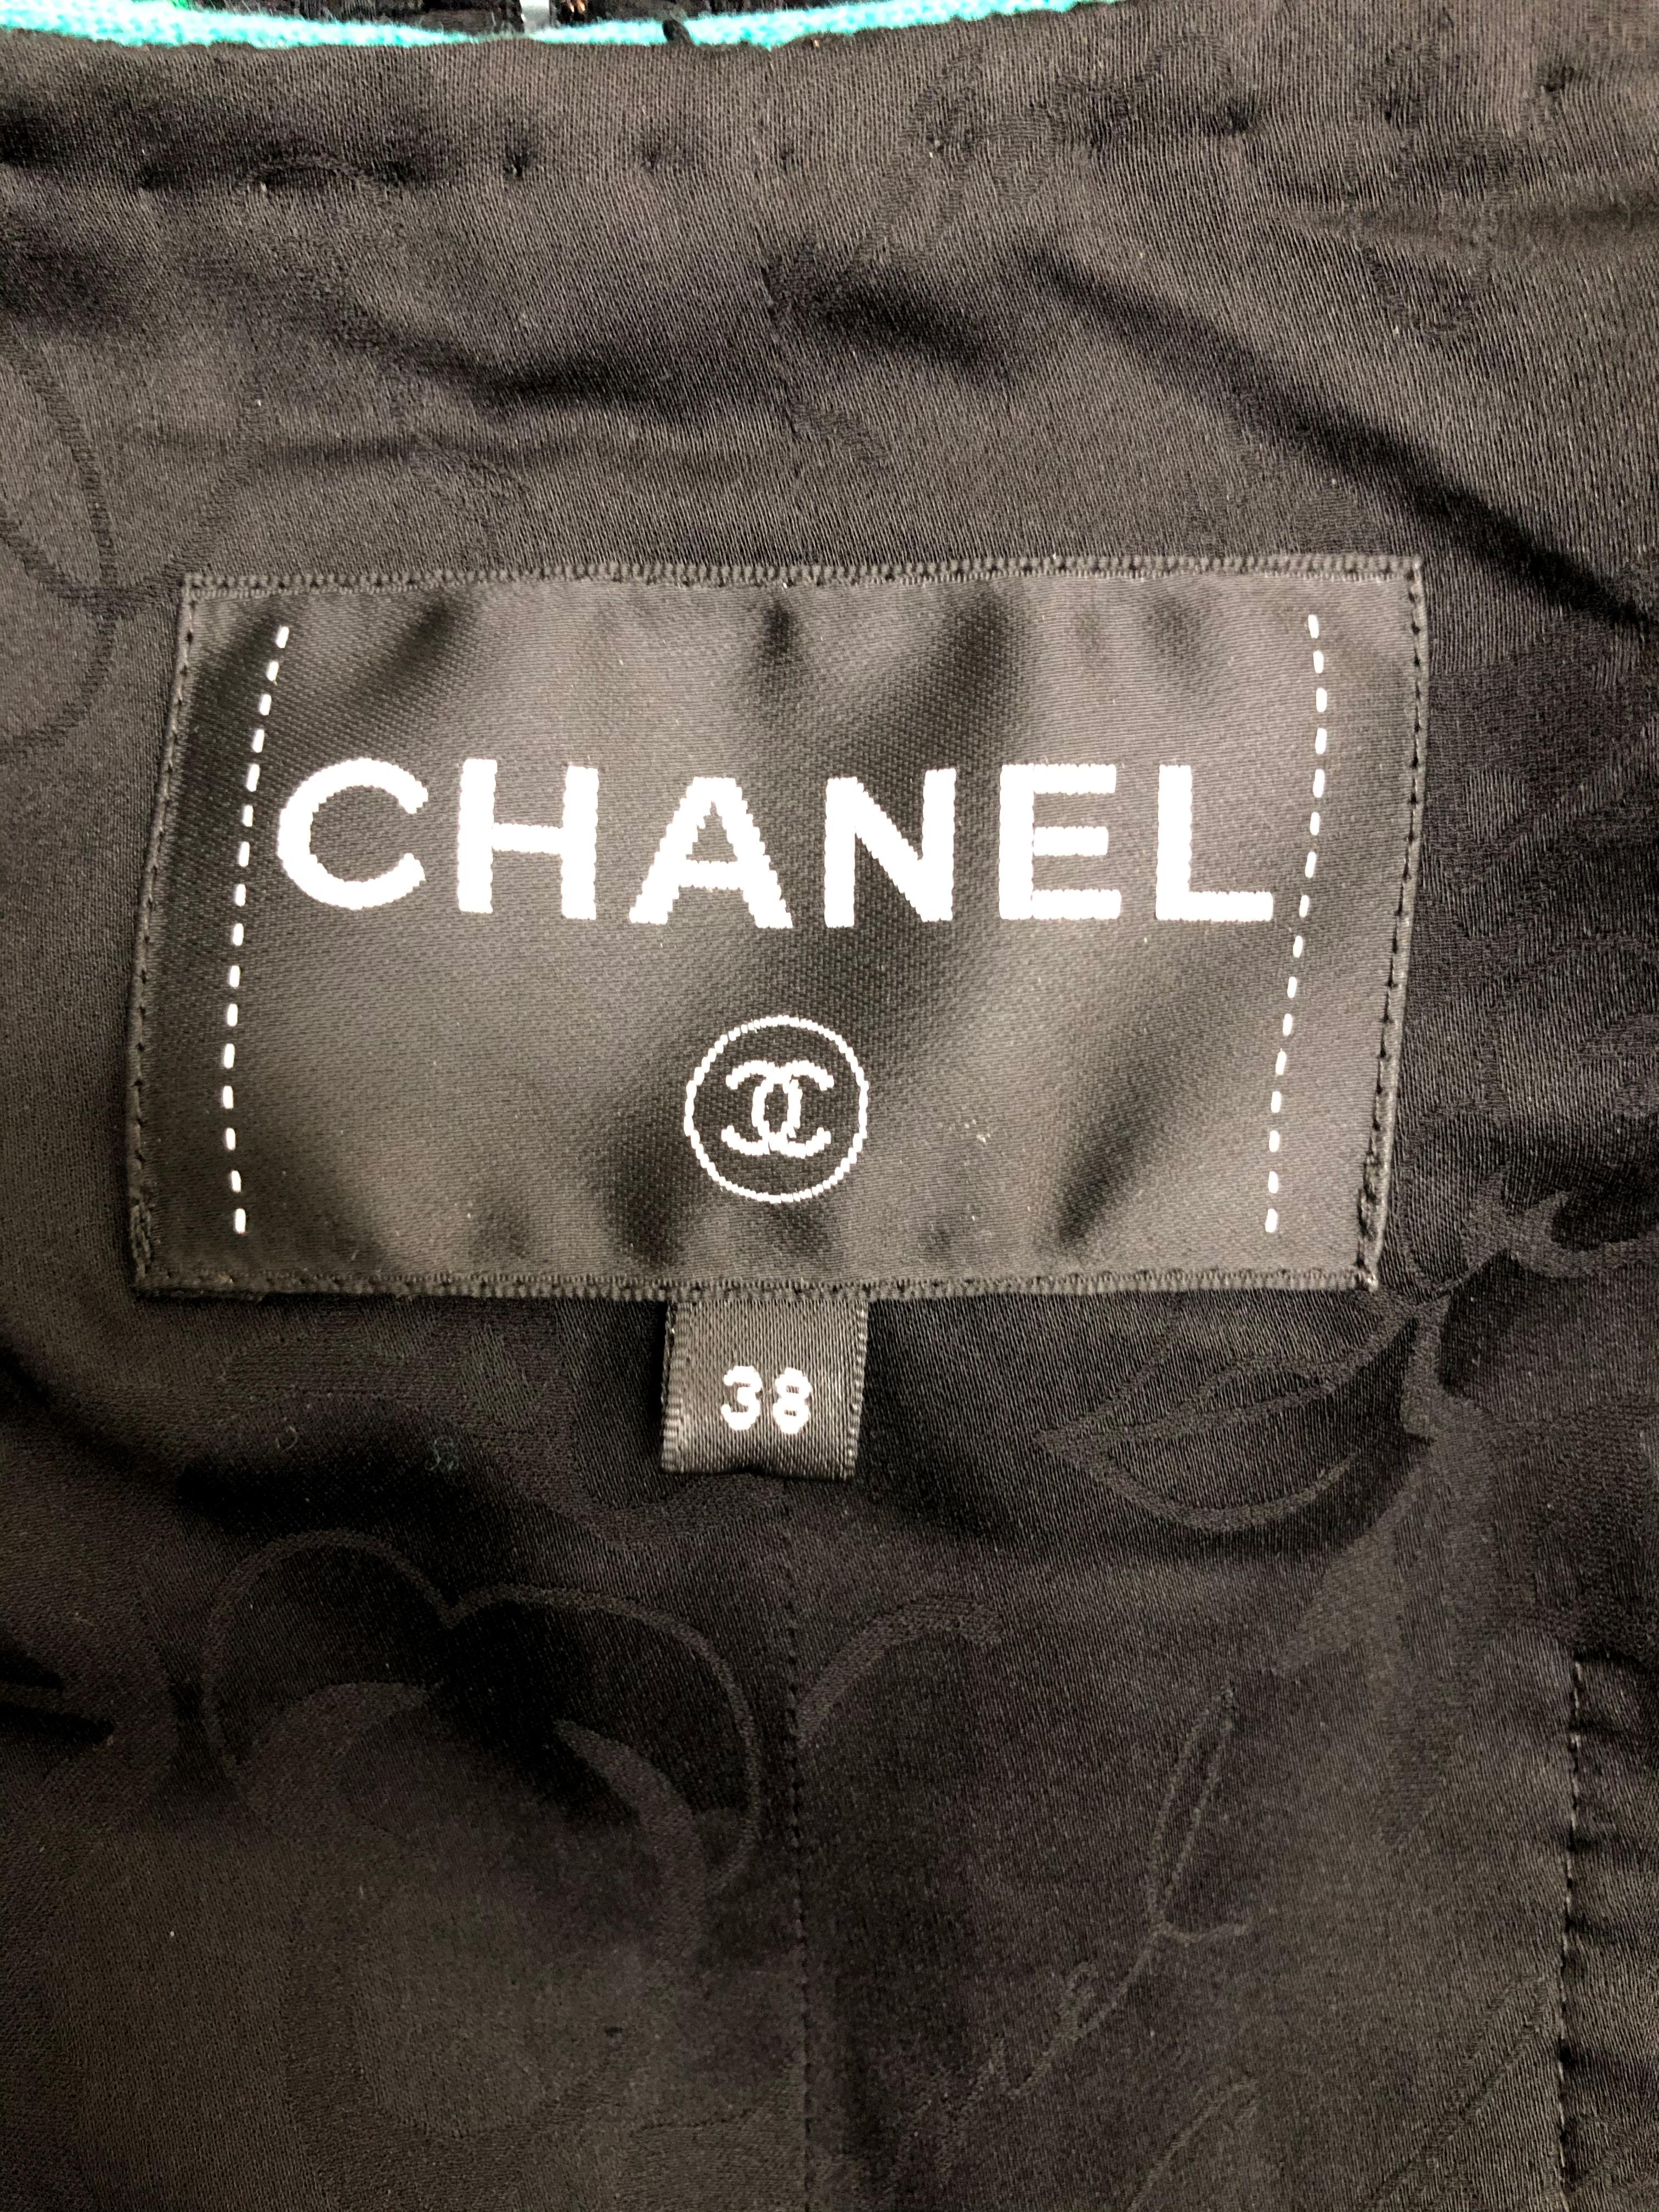 Chanel Black Fantasy Tweed 3/4 Jacket W/ Turquoise Knit Piping & CC Logo Buttons 6